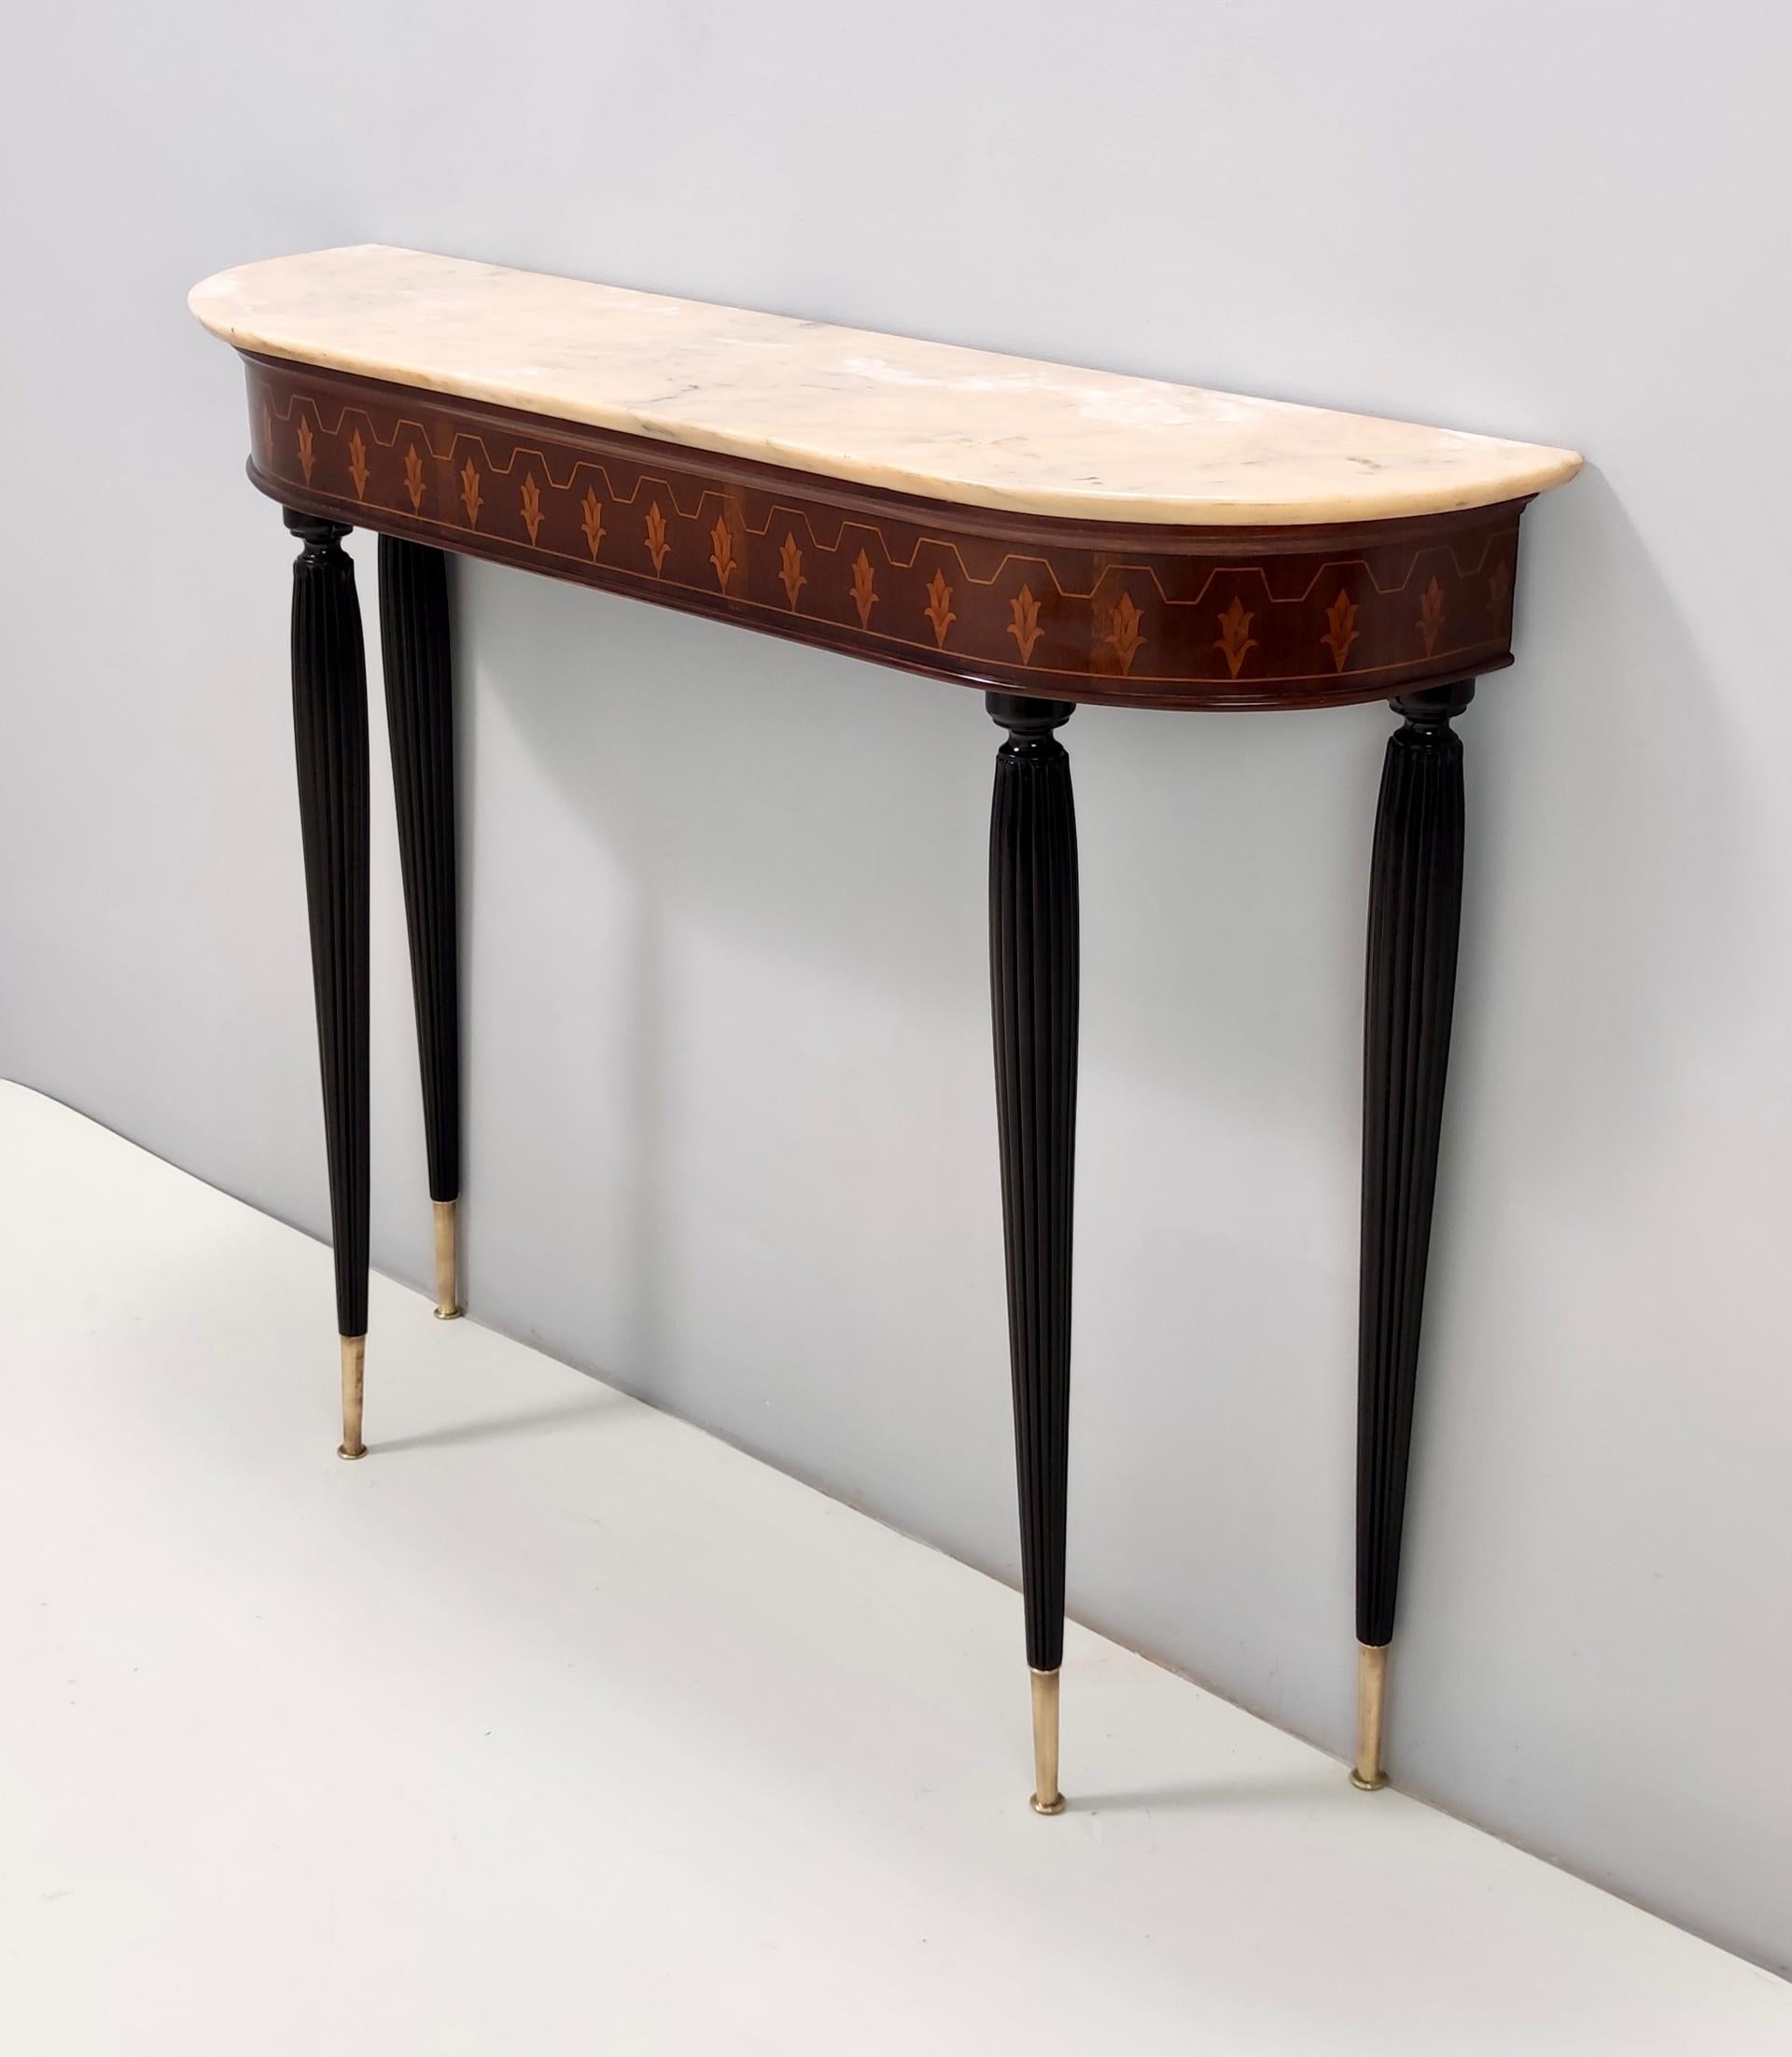 Vintage Console Table with a Demilune Marble Top in the Style of Buffa, Italy 1